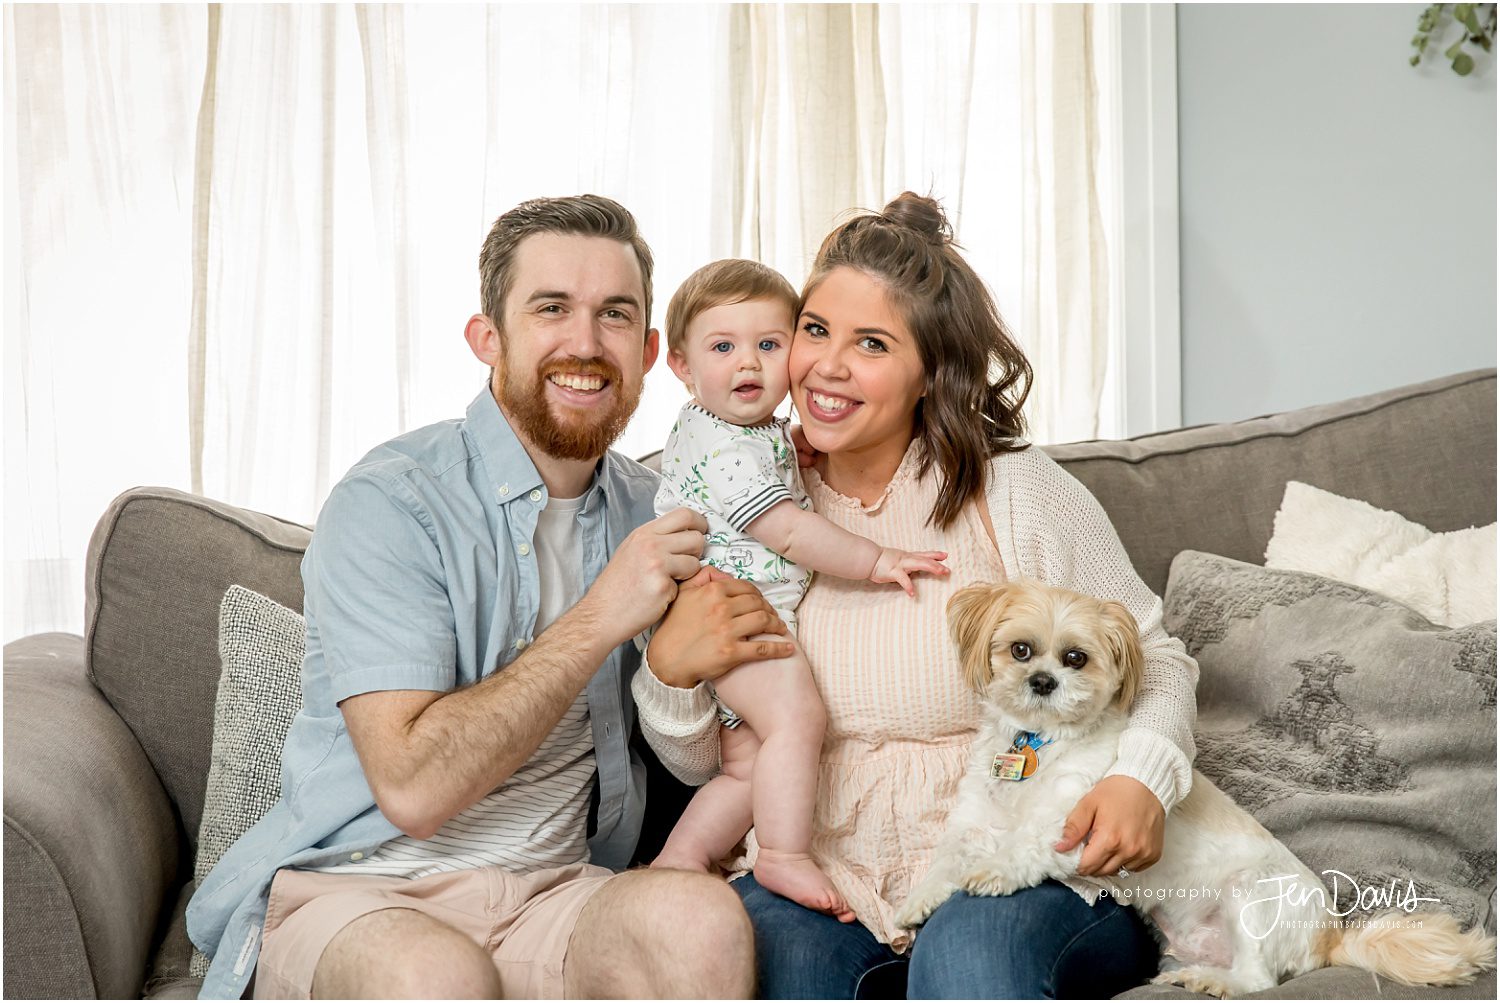 Baby's First Year Portraits Princeton NJ Family Portrait Photographer